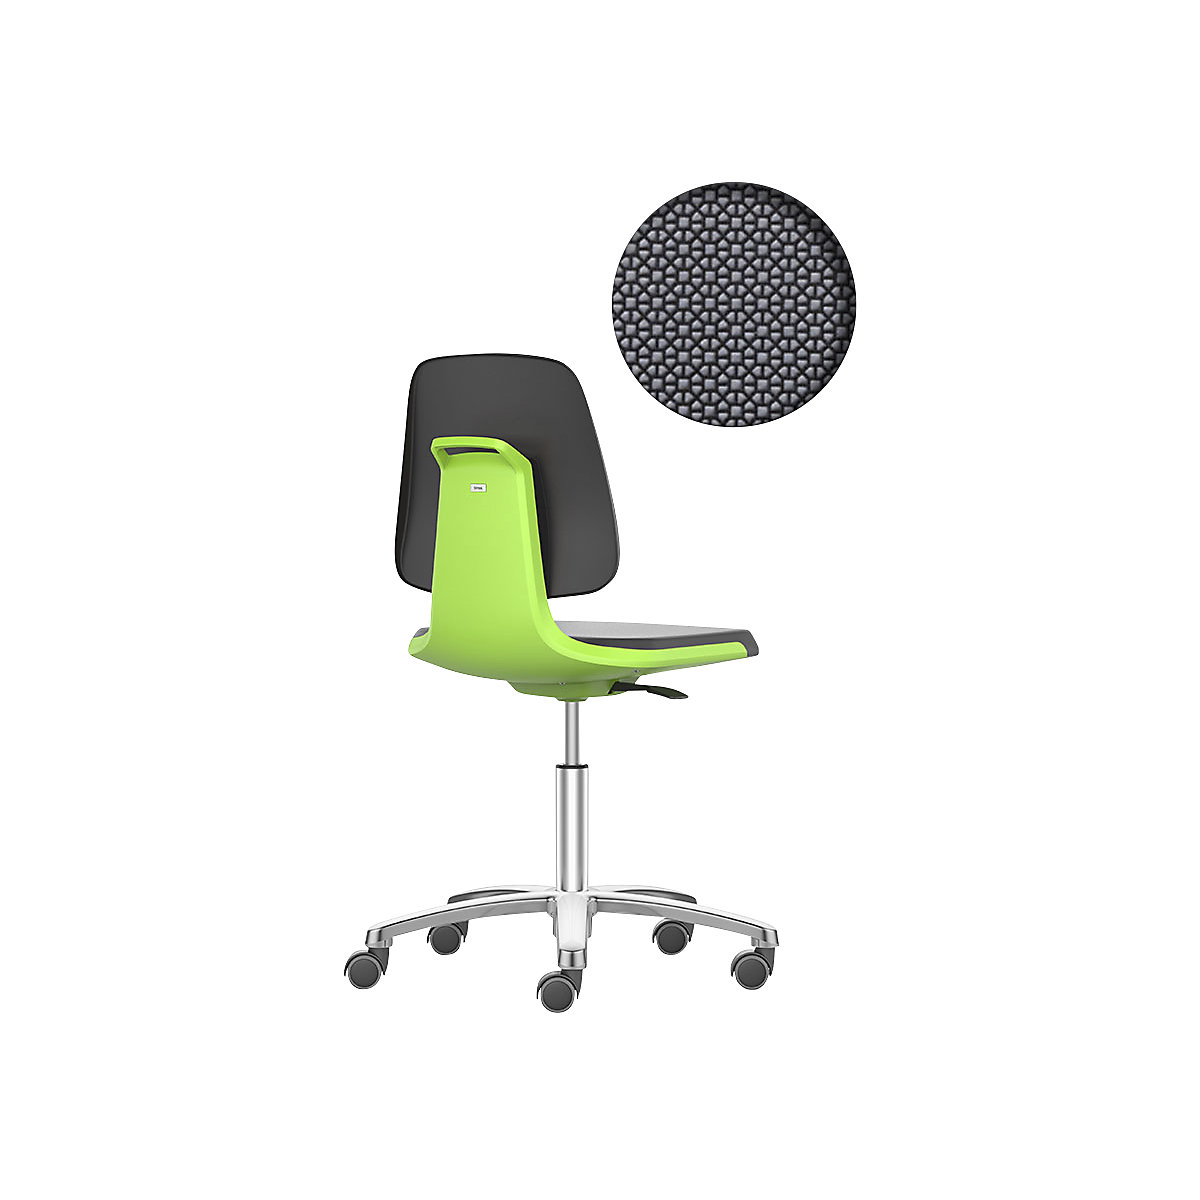 LABSIT industrial swivel chair – bimos, five-star base with castors, Supertec seat, green-27